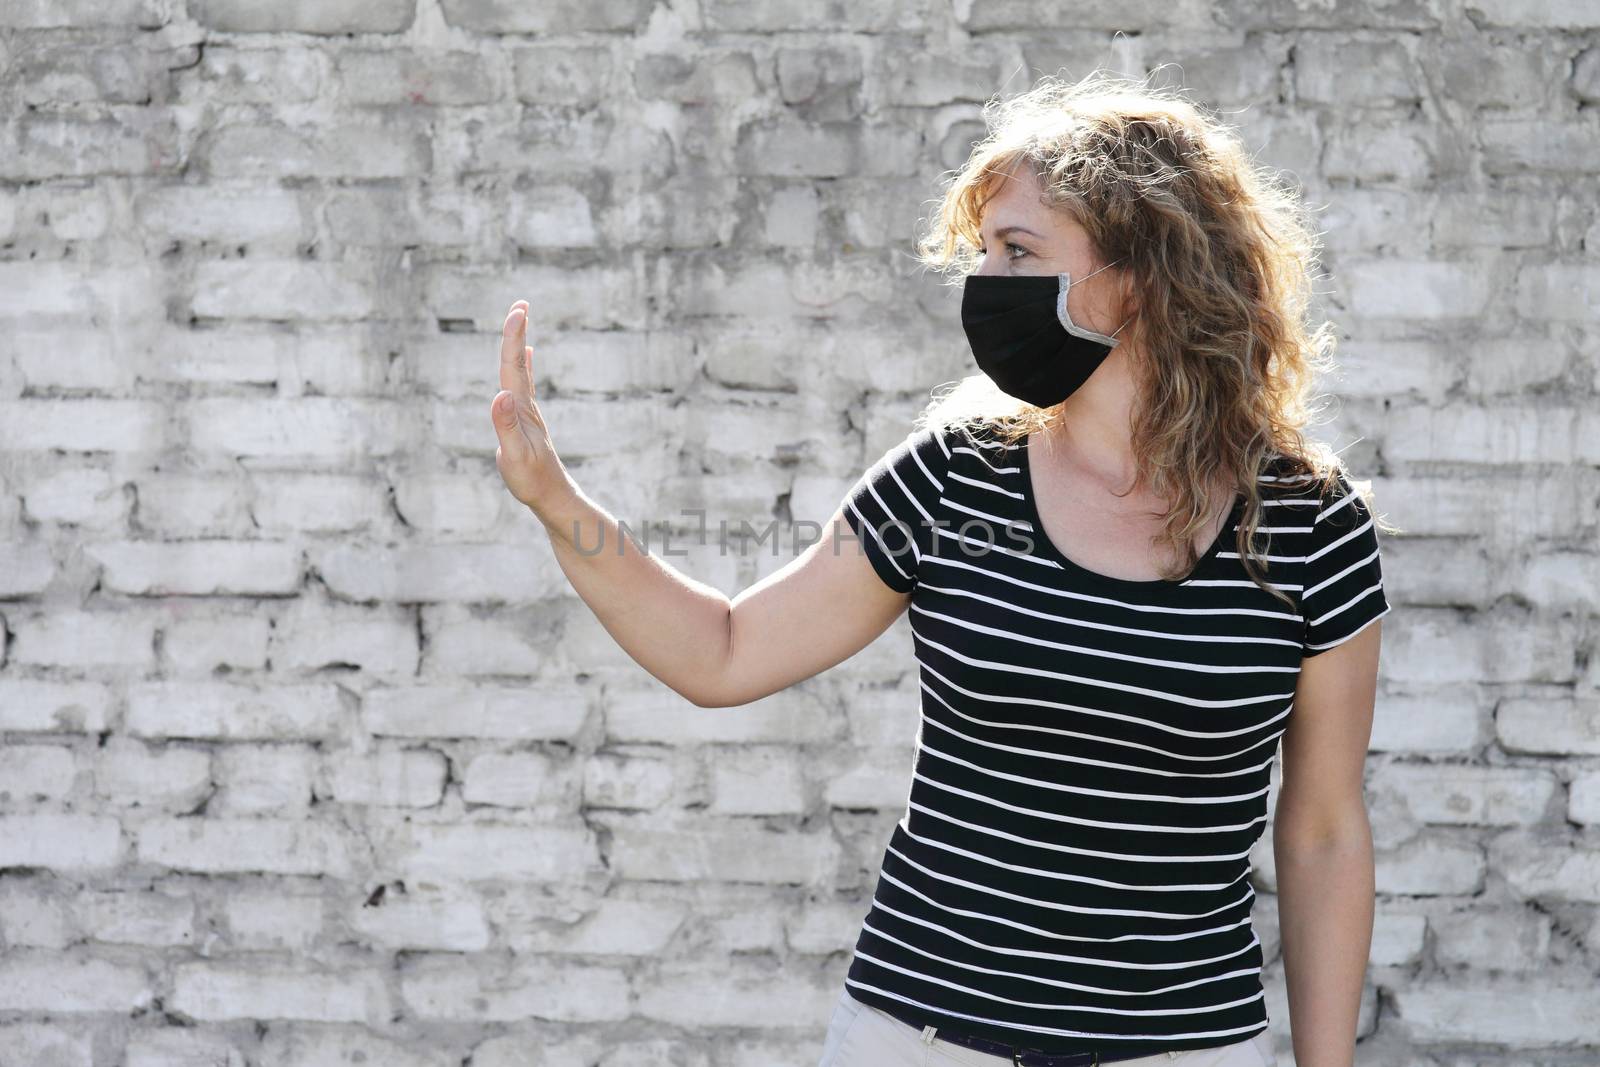 Portrait of a Girl in a protective mask free space for an inscription. Social distancing. White brick wall in the background. Shows stop by hand